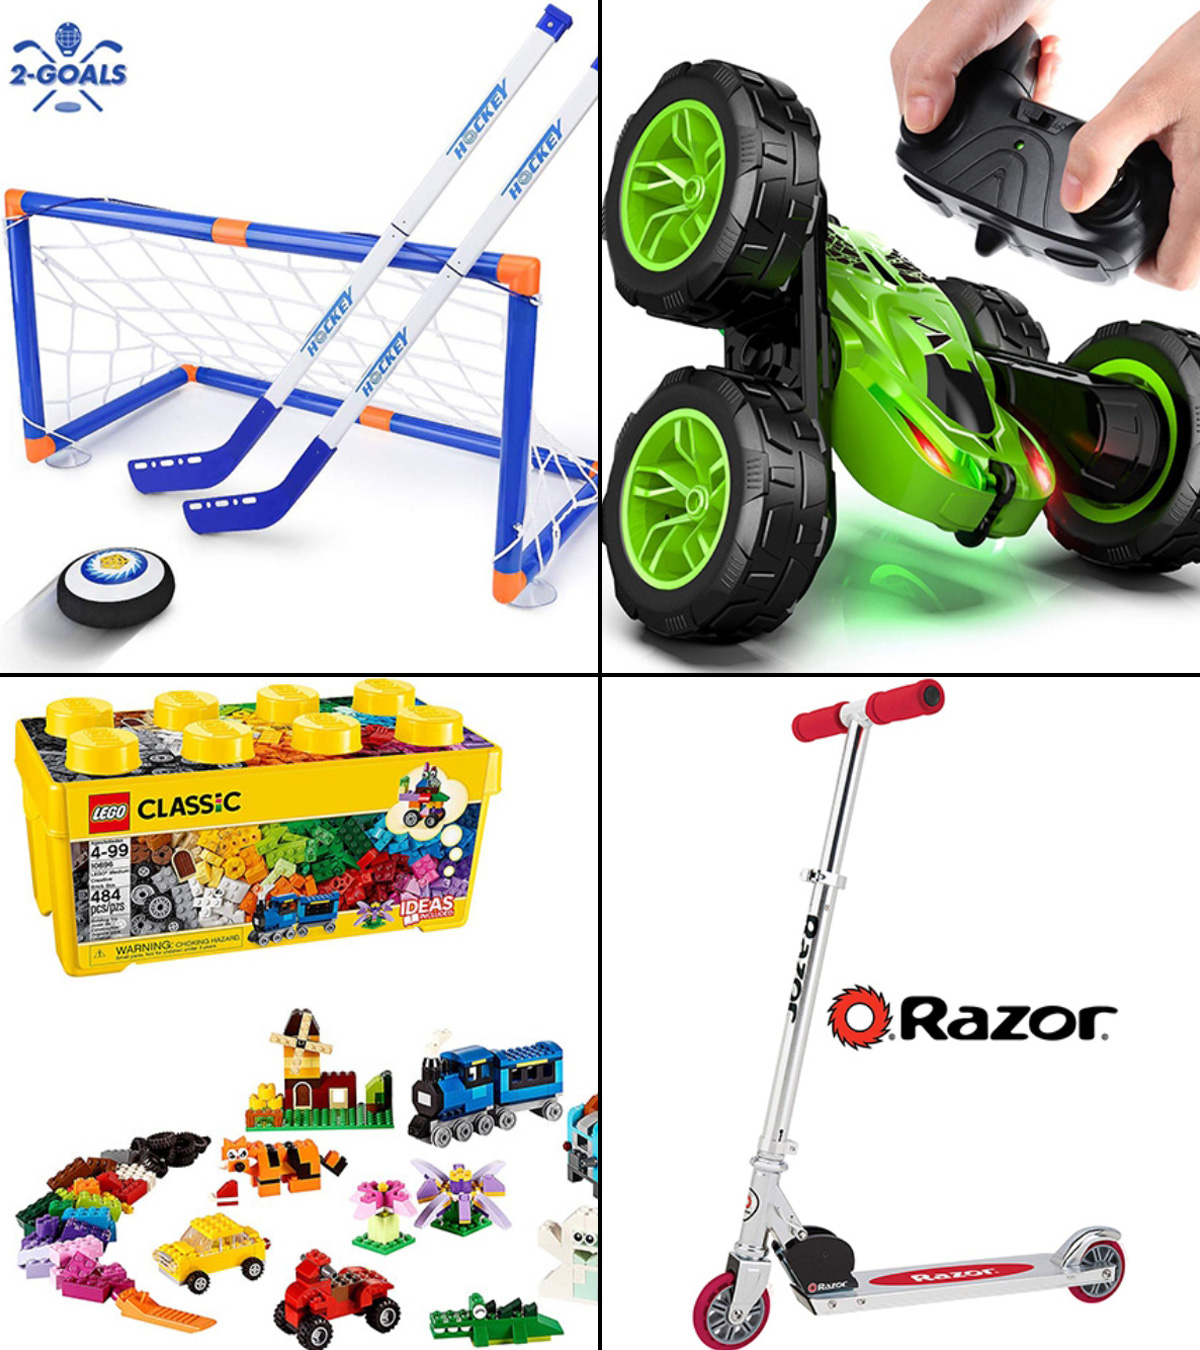 22 Best Toys For 5-, 6-, And 7-Year-Old Boys To Play With In 2023